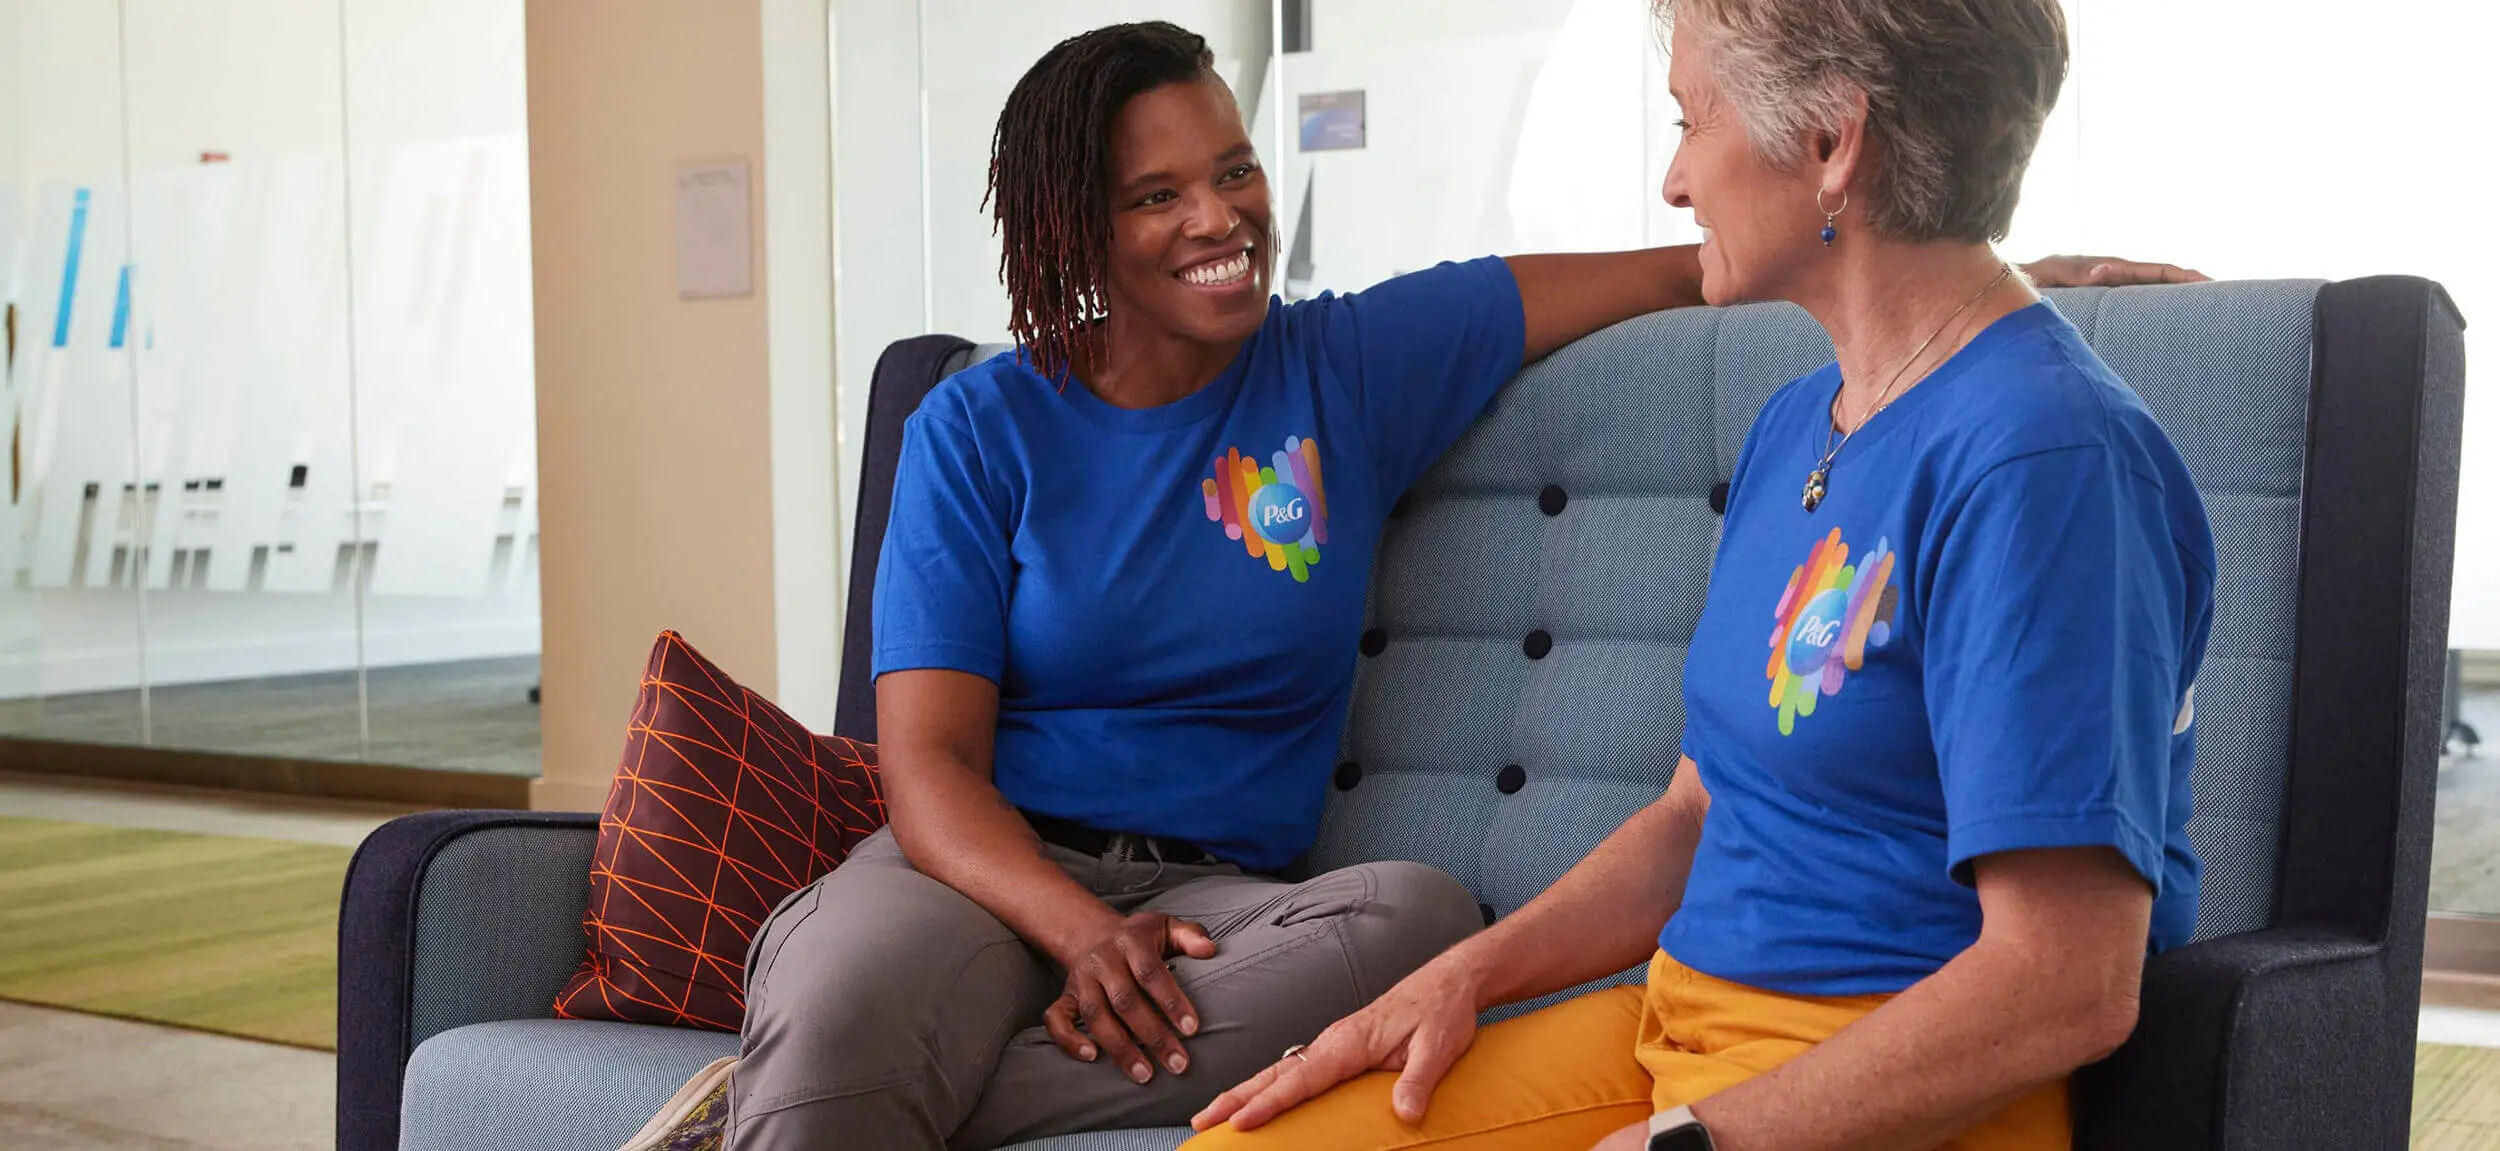 Two smiling women wearing t-shirts with a heart shaped Pride logo and the P&G logo sit together on a sofa.